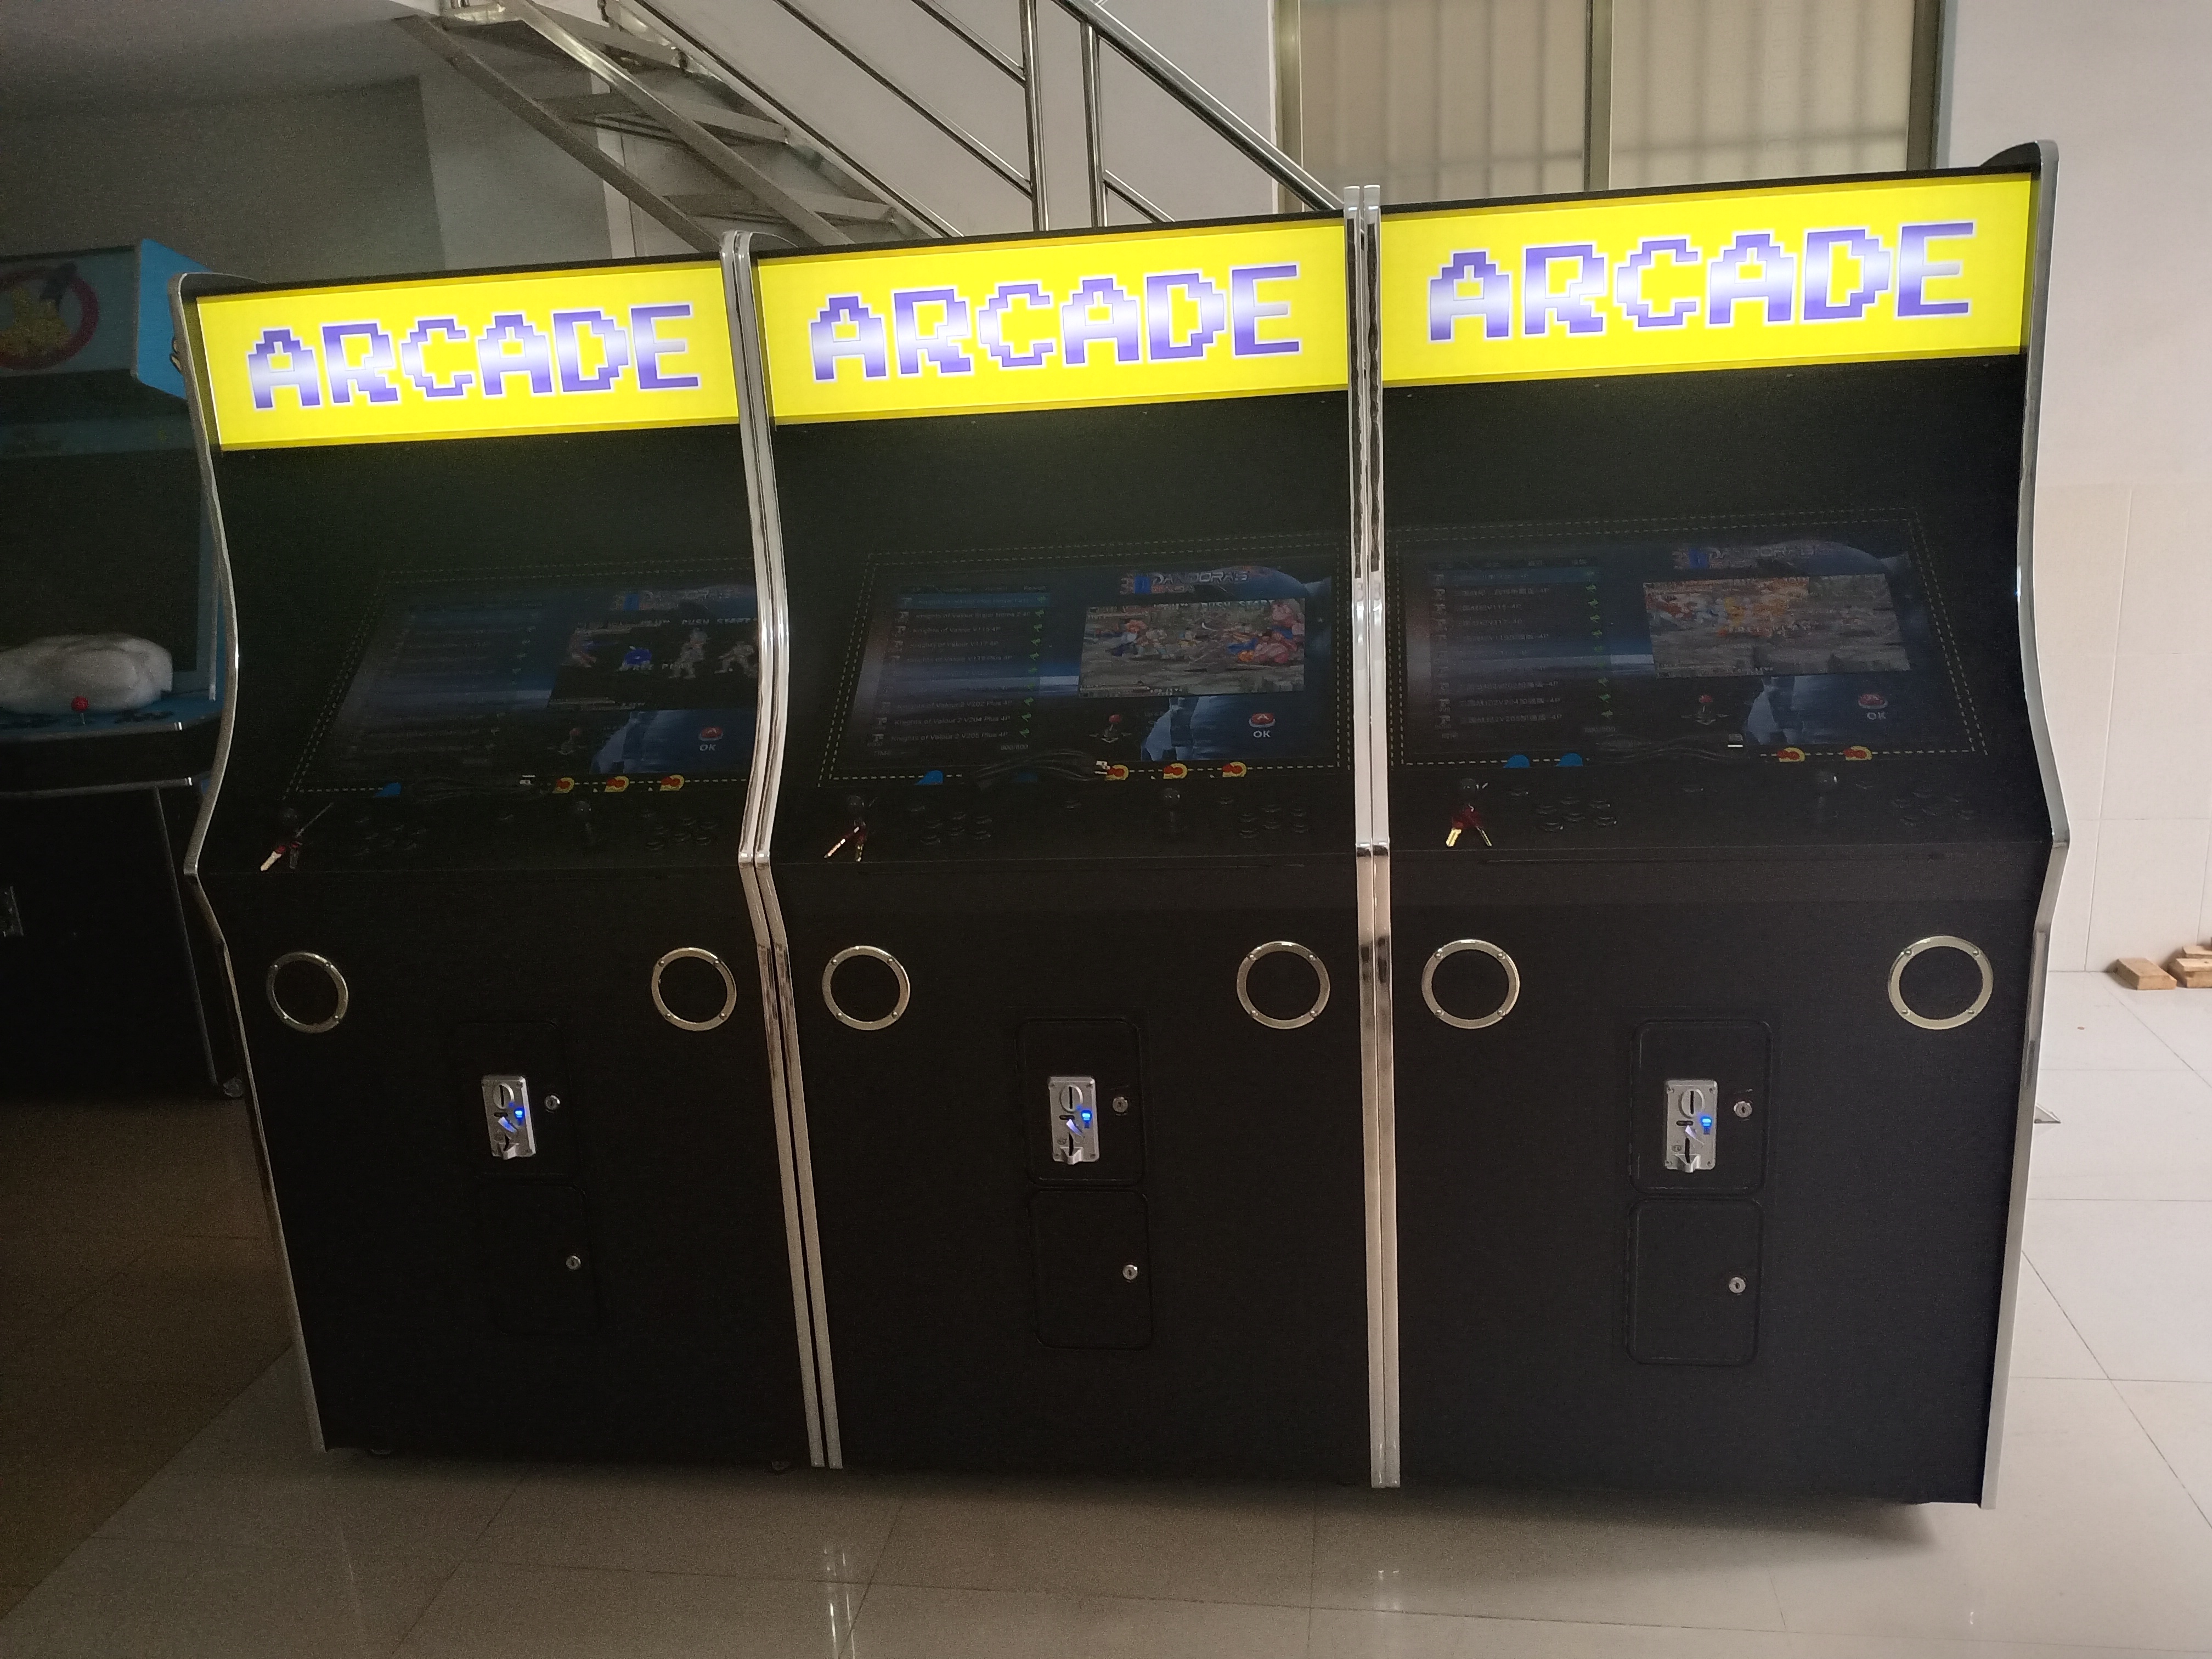 Pacman-Fighting-Arcade-game-machine-China-Direct-32-inch-3188-in-1-games-Tomy-Arcade